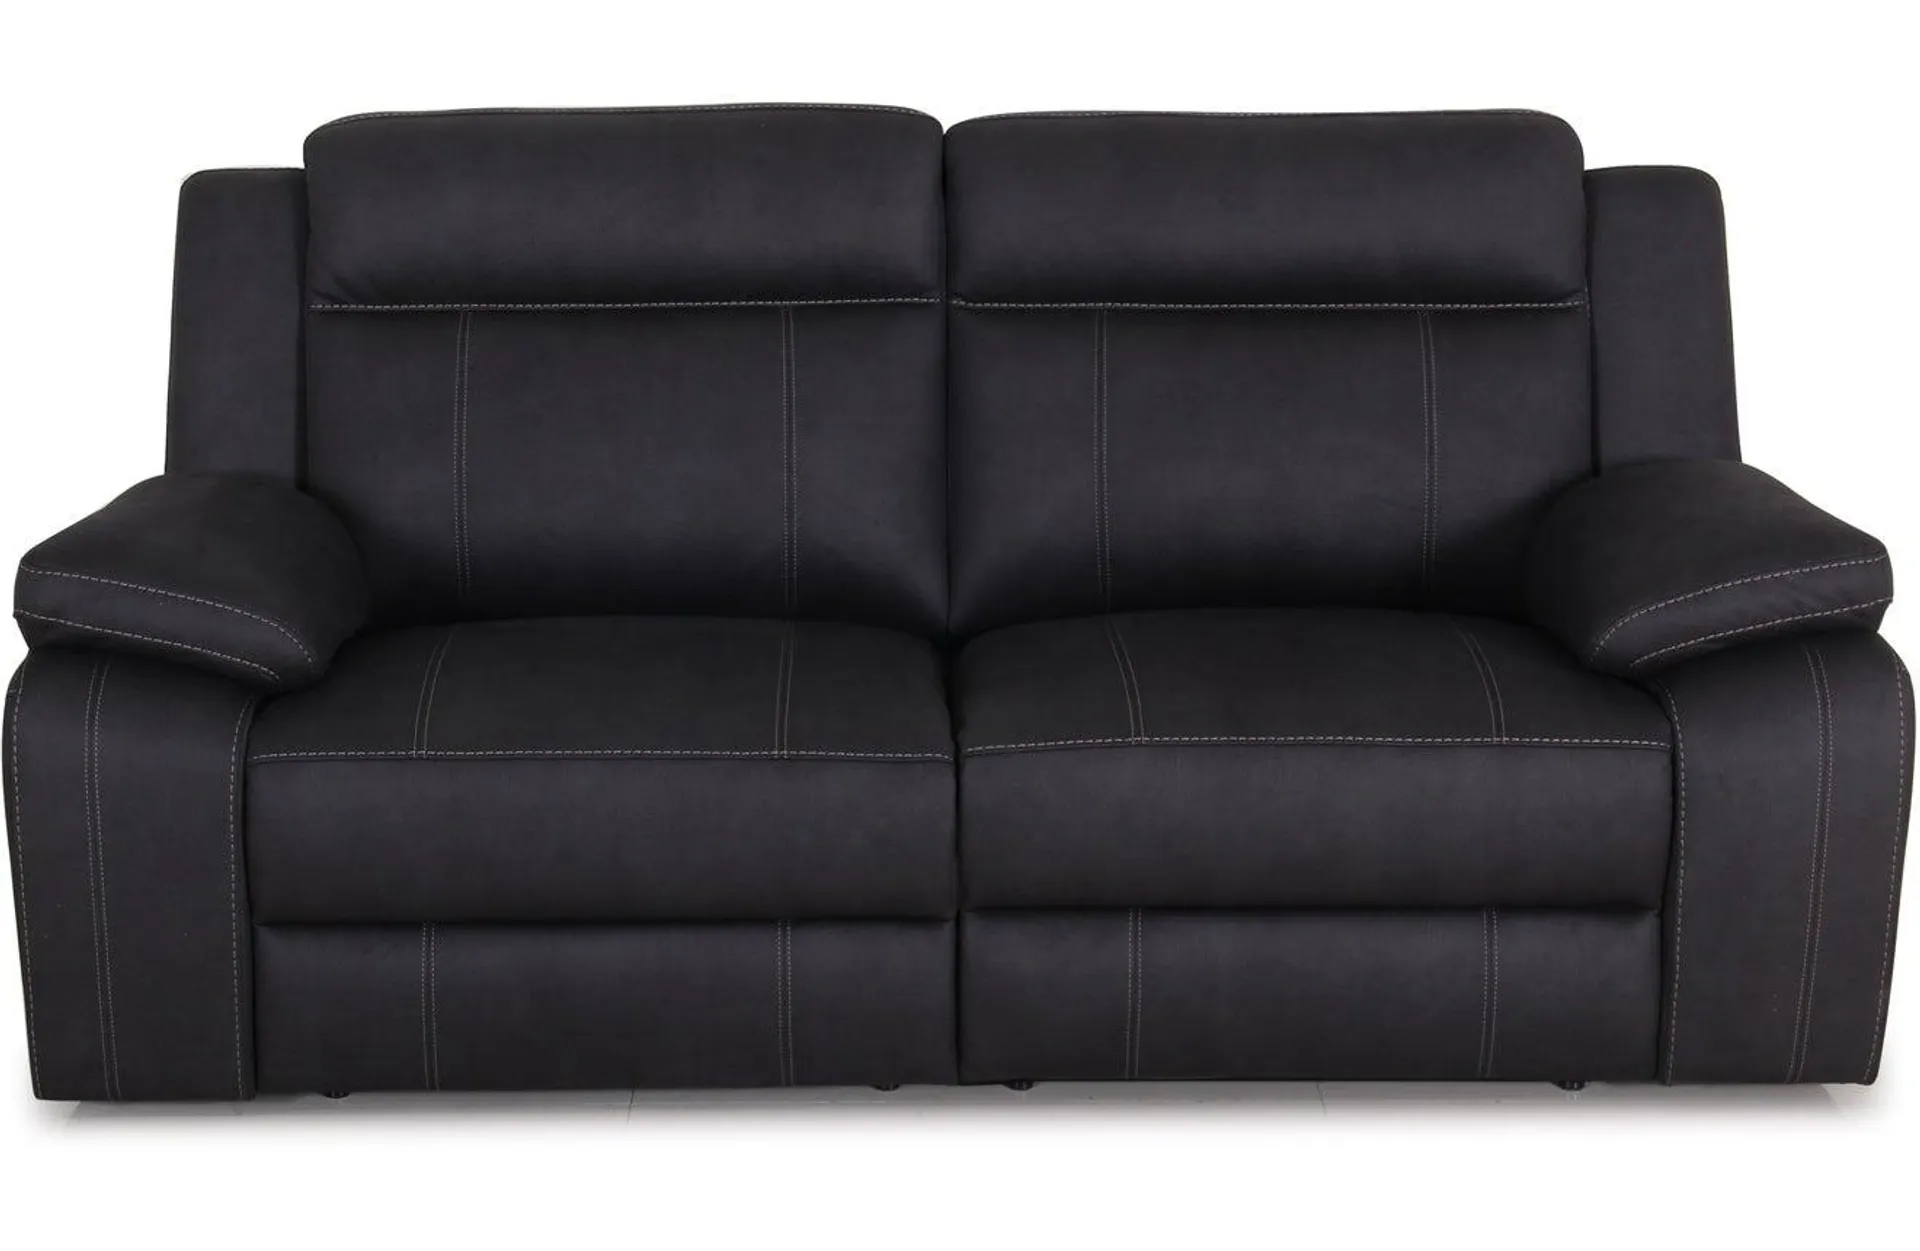 Vienna 2.5 Seater Fabric Sofa with Built in Recliners - Graphite